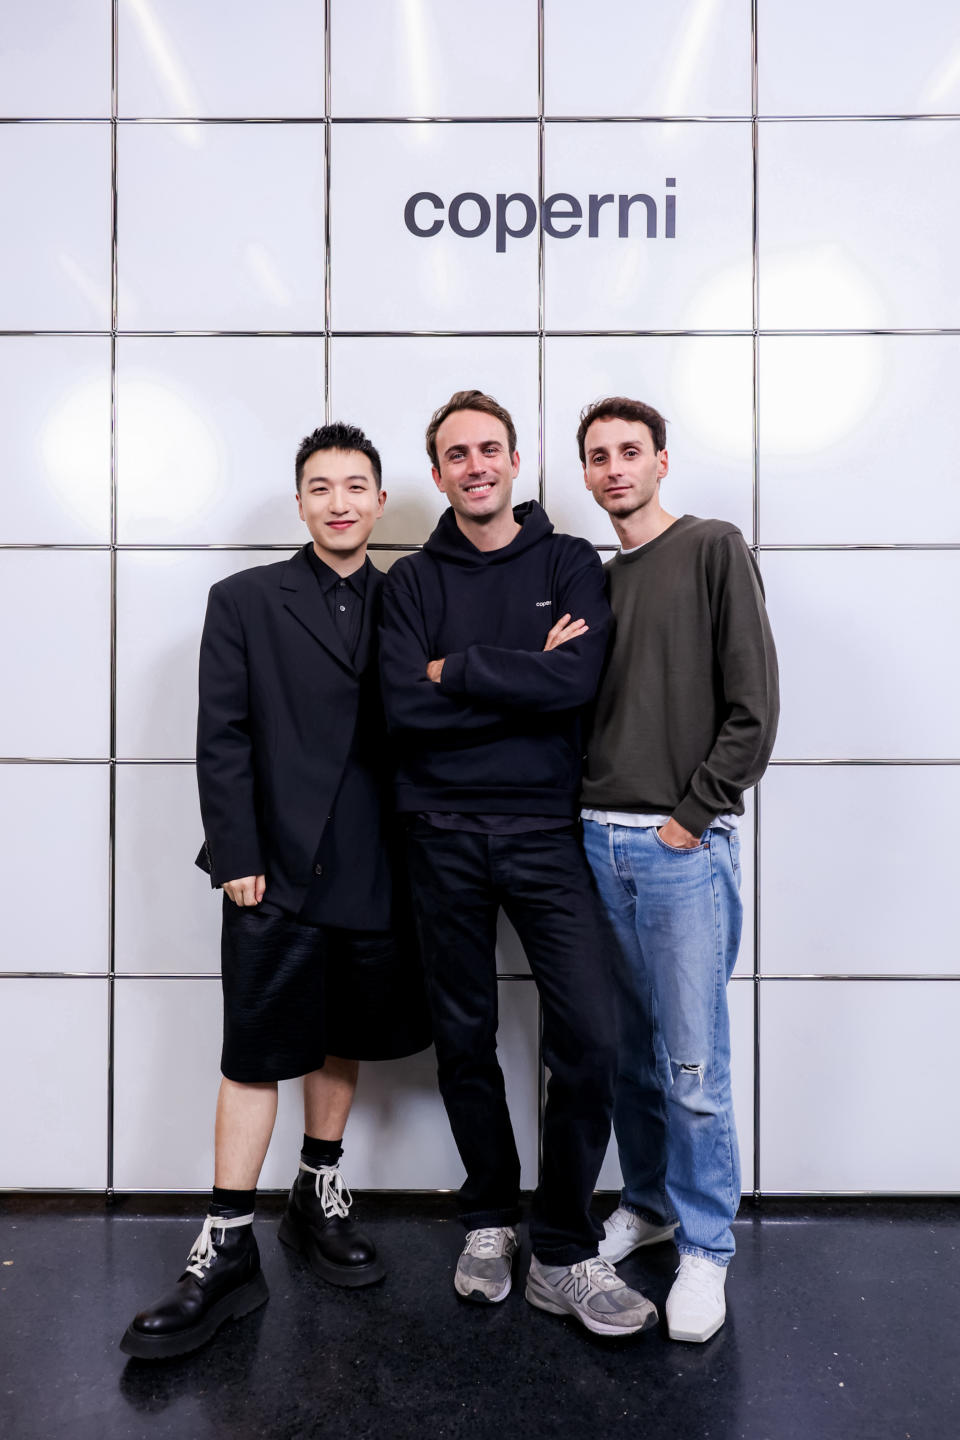 Tao Liang, professionally known as Mr Bags, with Coperni duo Sébastien Meyer and Arnaud Vaillant